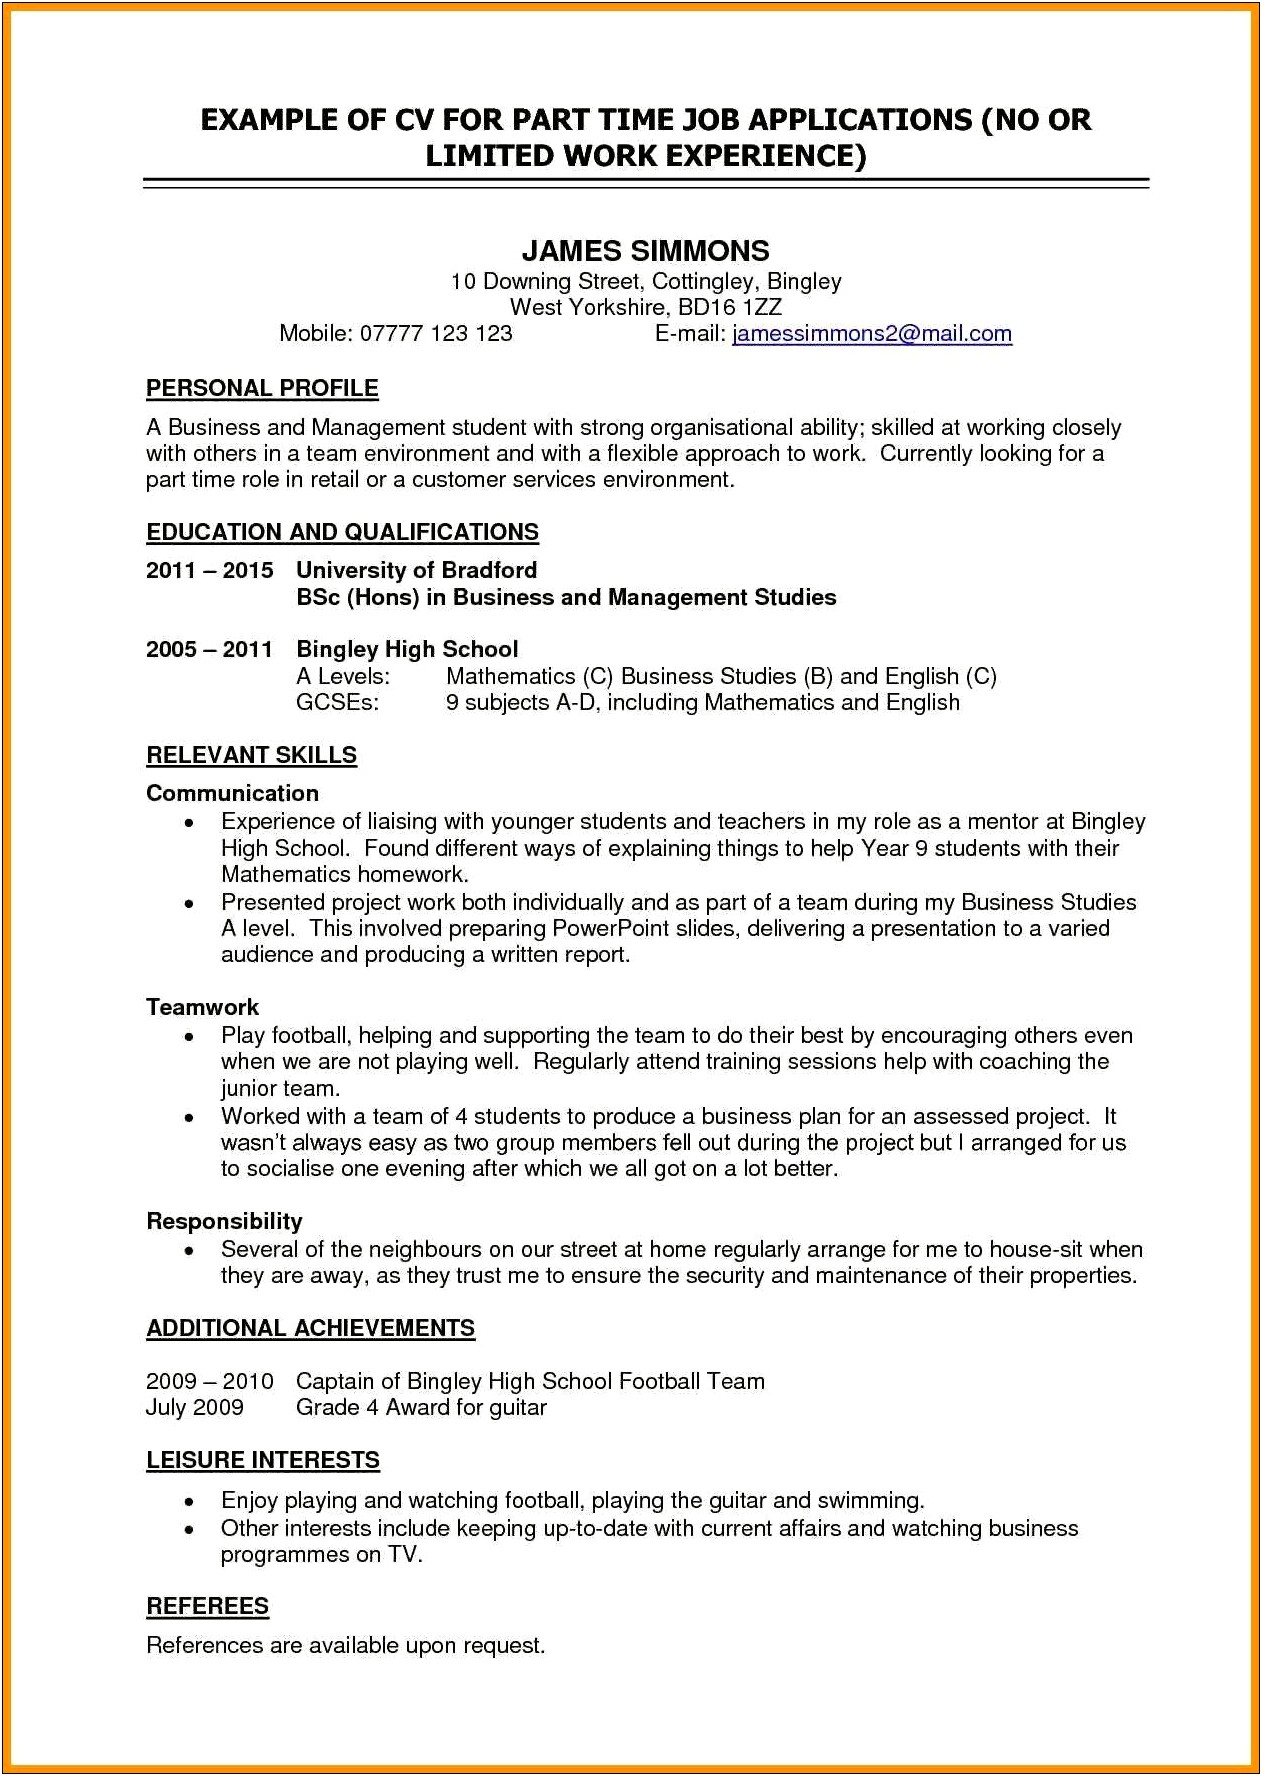 Resume Objective Statement For Part Time Job